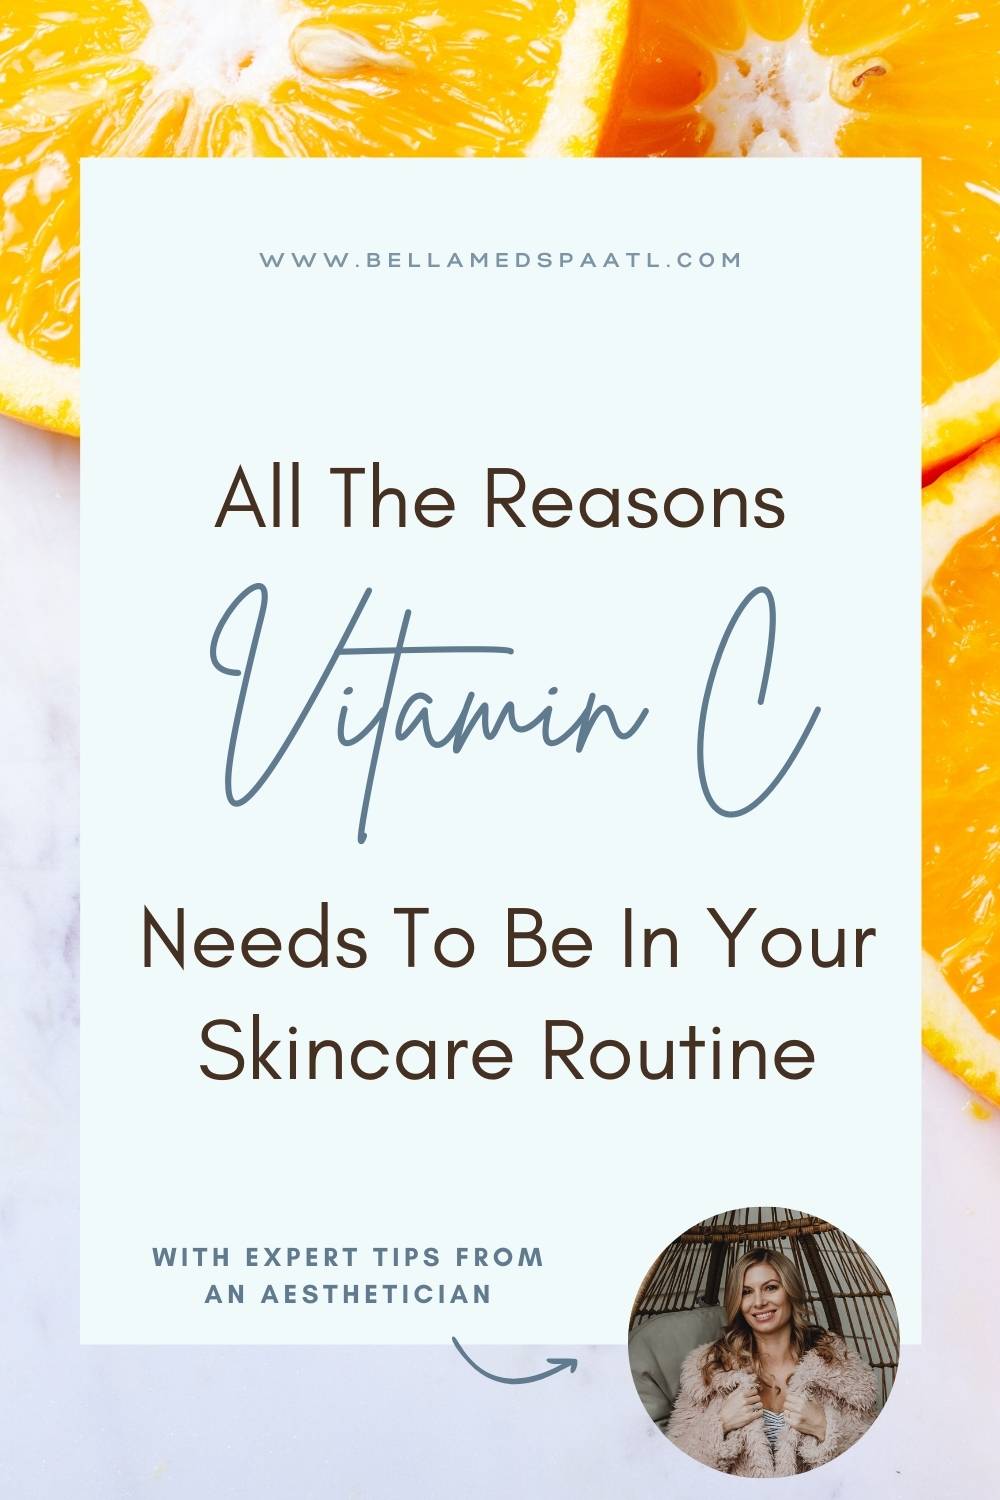 Wondering what are the best skincare products out there? Vitamin C has been proven to be amazing for your skin, especially if you're looking for anti-aging products! Here are all the ways Vitamin C is AMAZING for your skin and why it needs to be in your daily skincare routine!